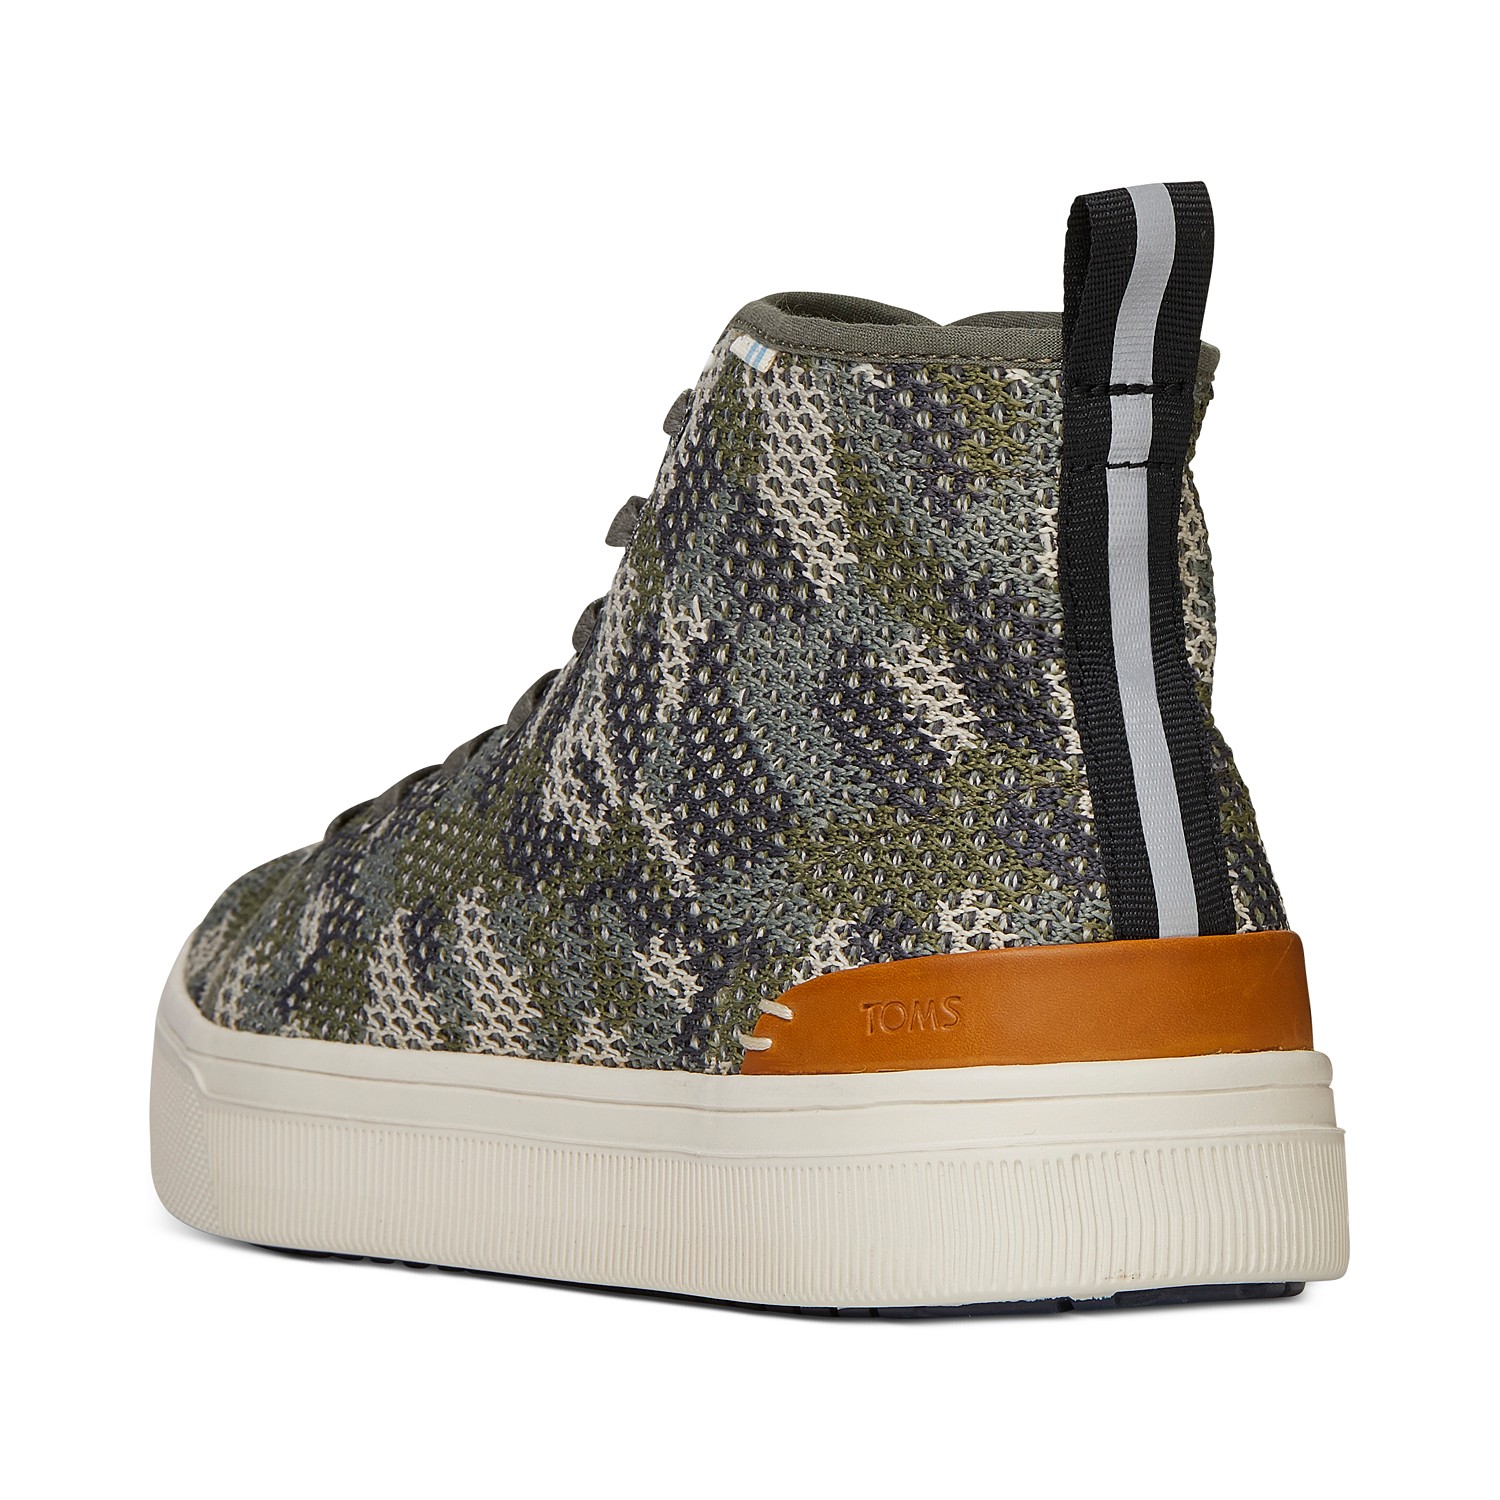 woocommerce-673321-2209615.cloudwaysapps.com-toms-mens-green-camouflage-travel-lite-high-top-sneakers